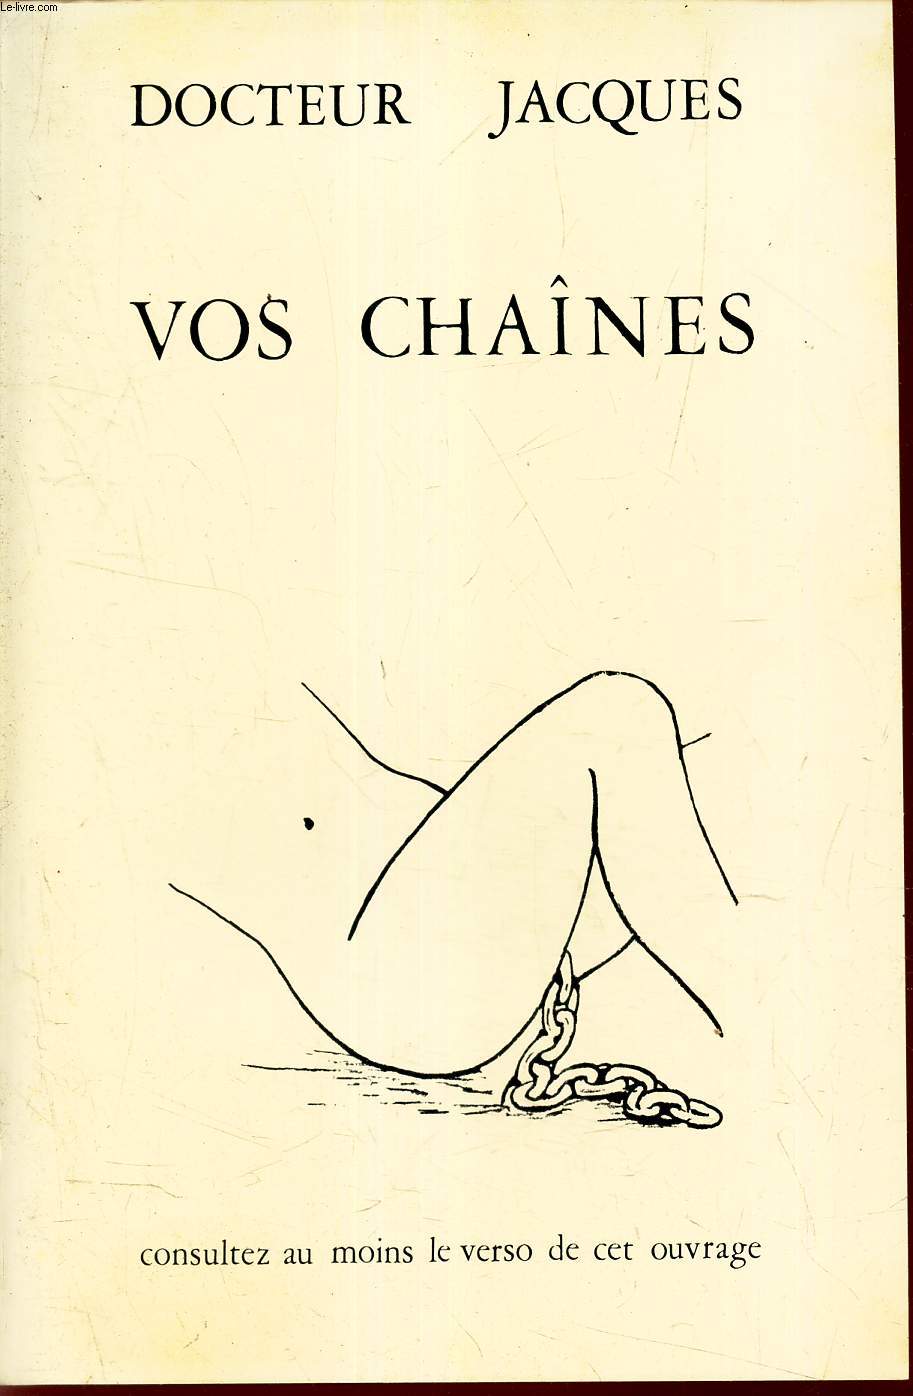 VOS CHAINES